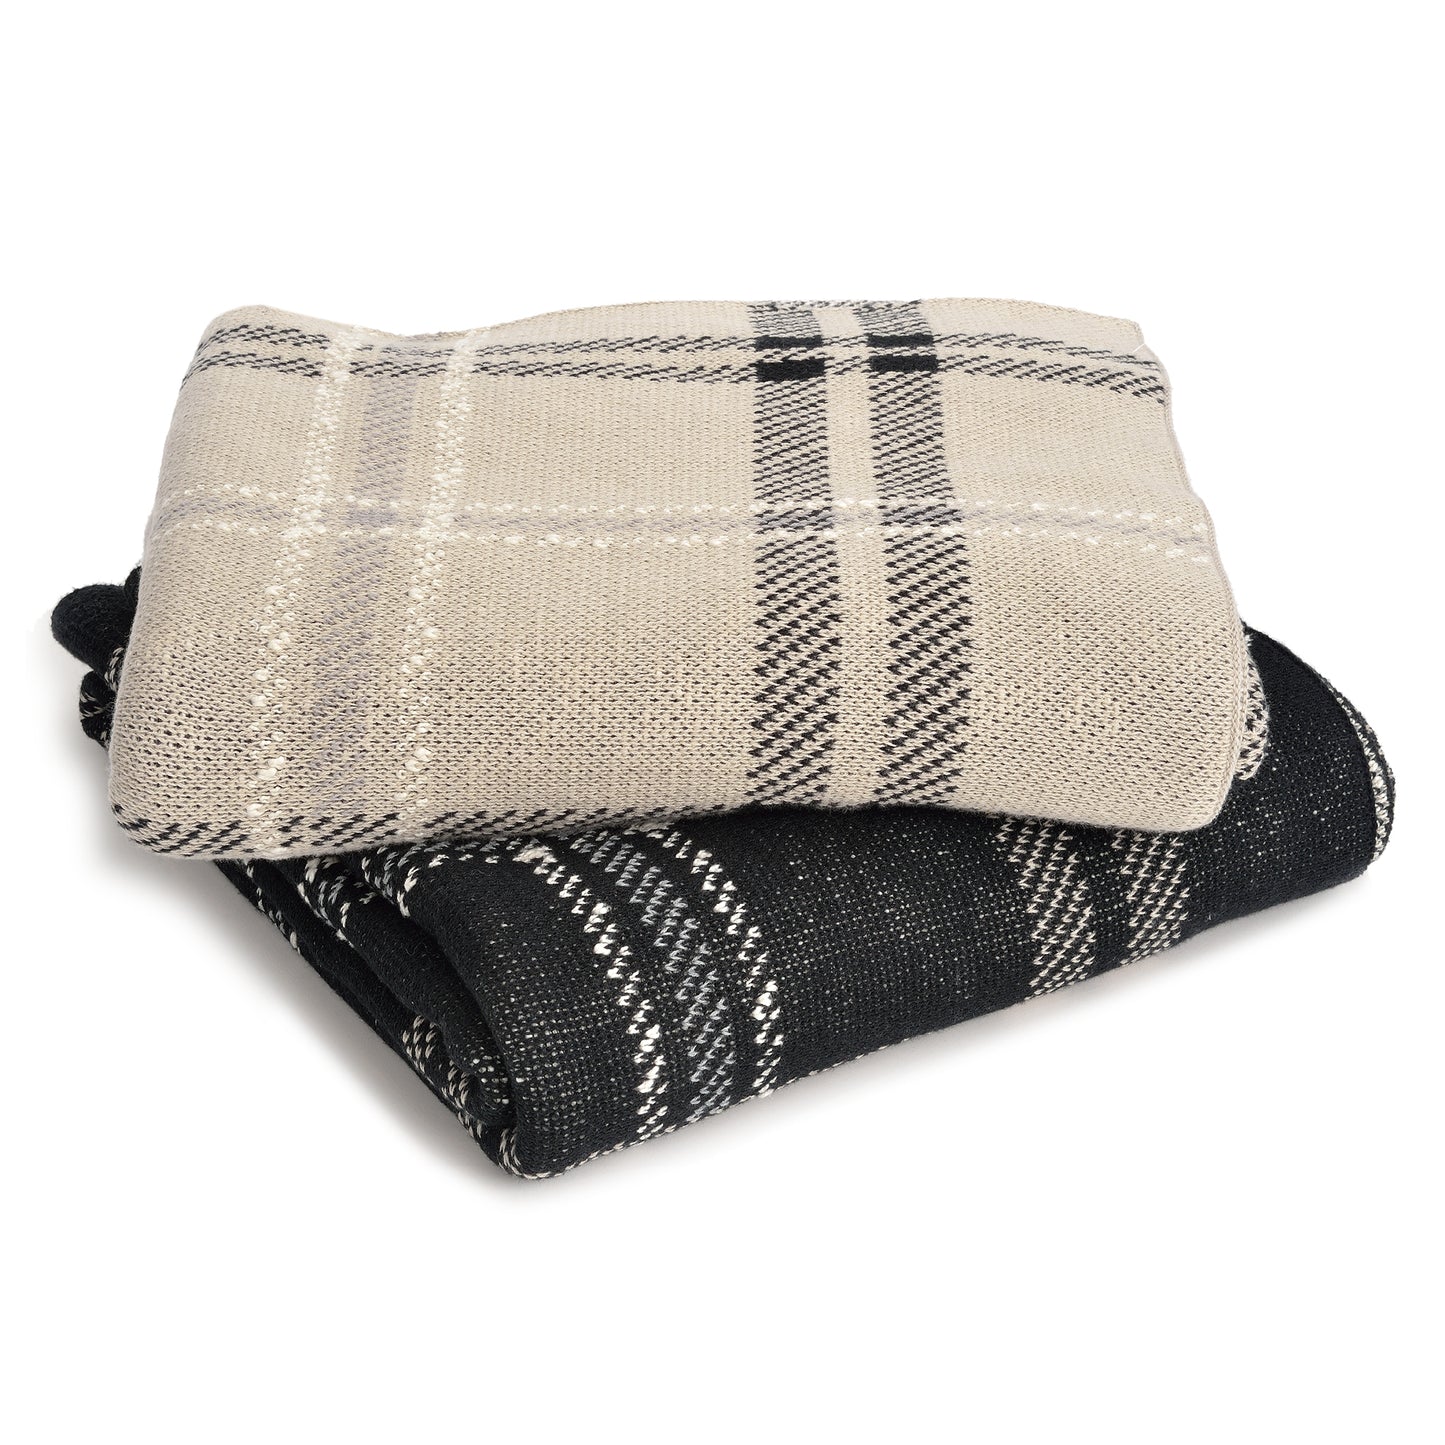 Oliver Plaid Pillow and Throw Set - Sand